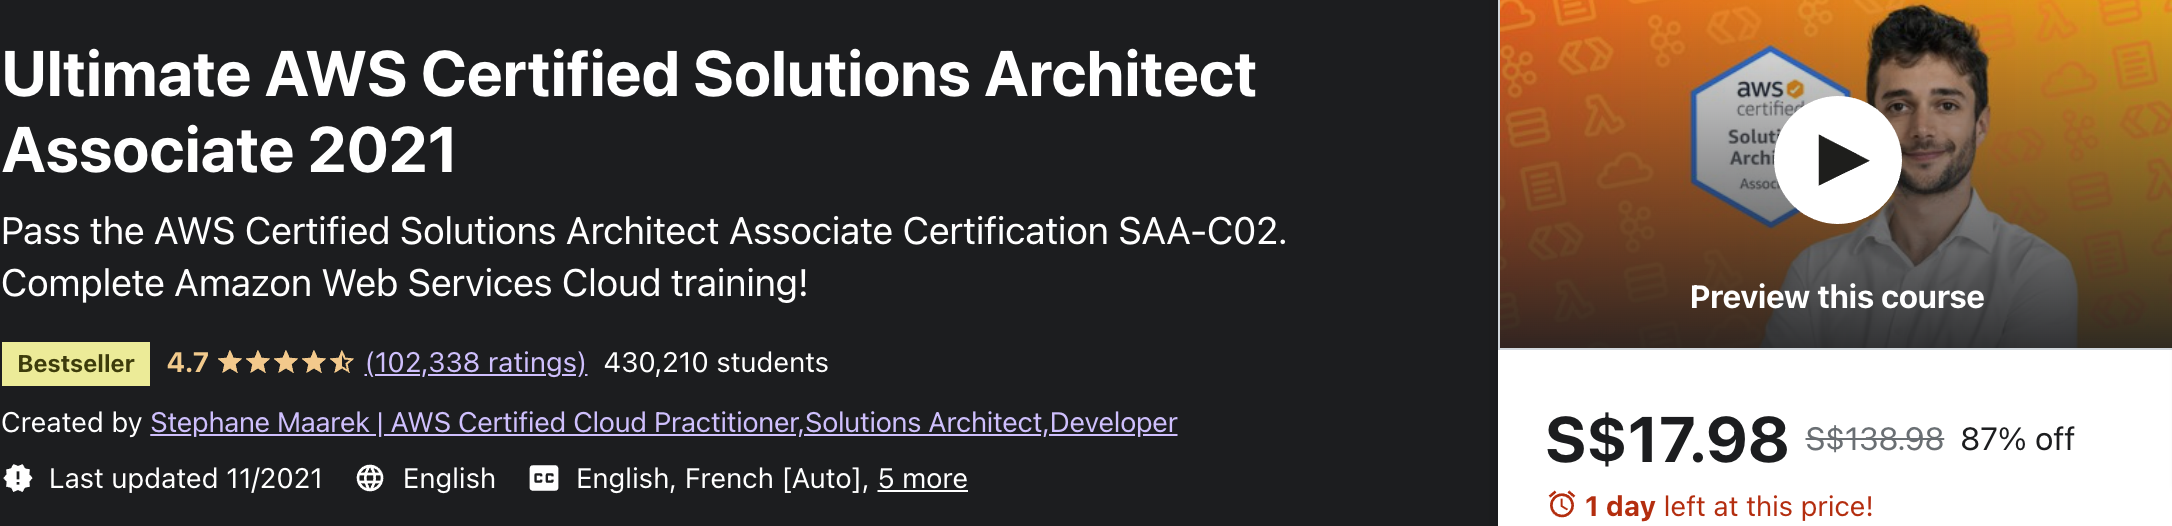 Ultimate AWS Certified Solutions Architect Associate 2021